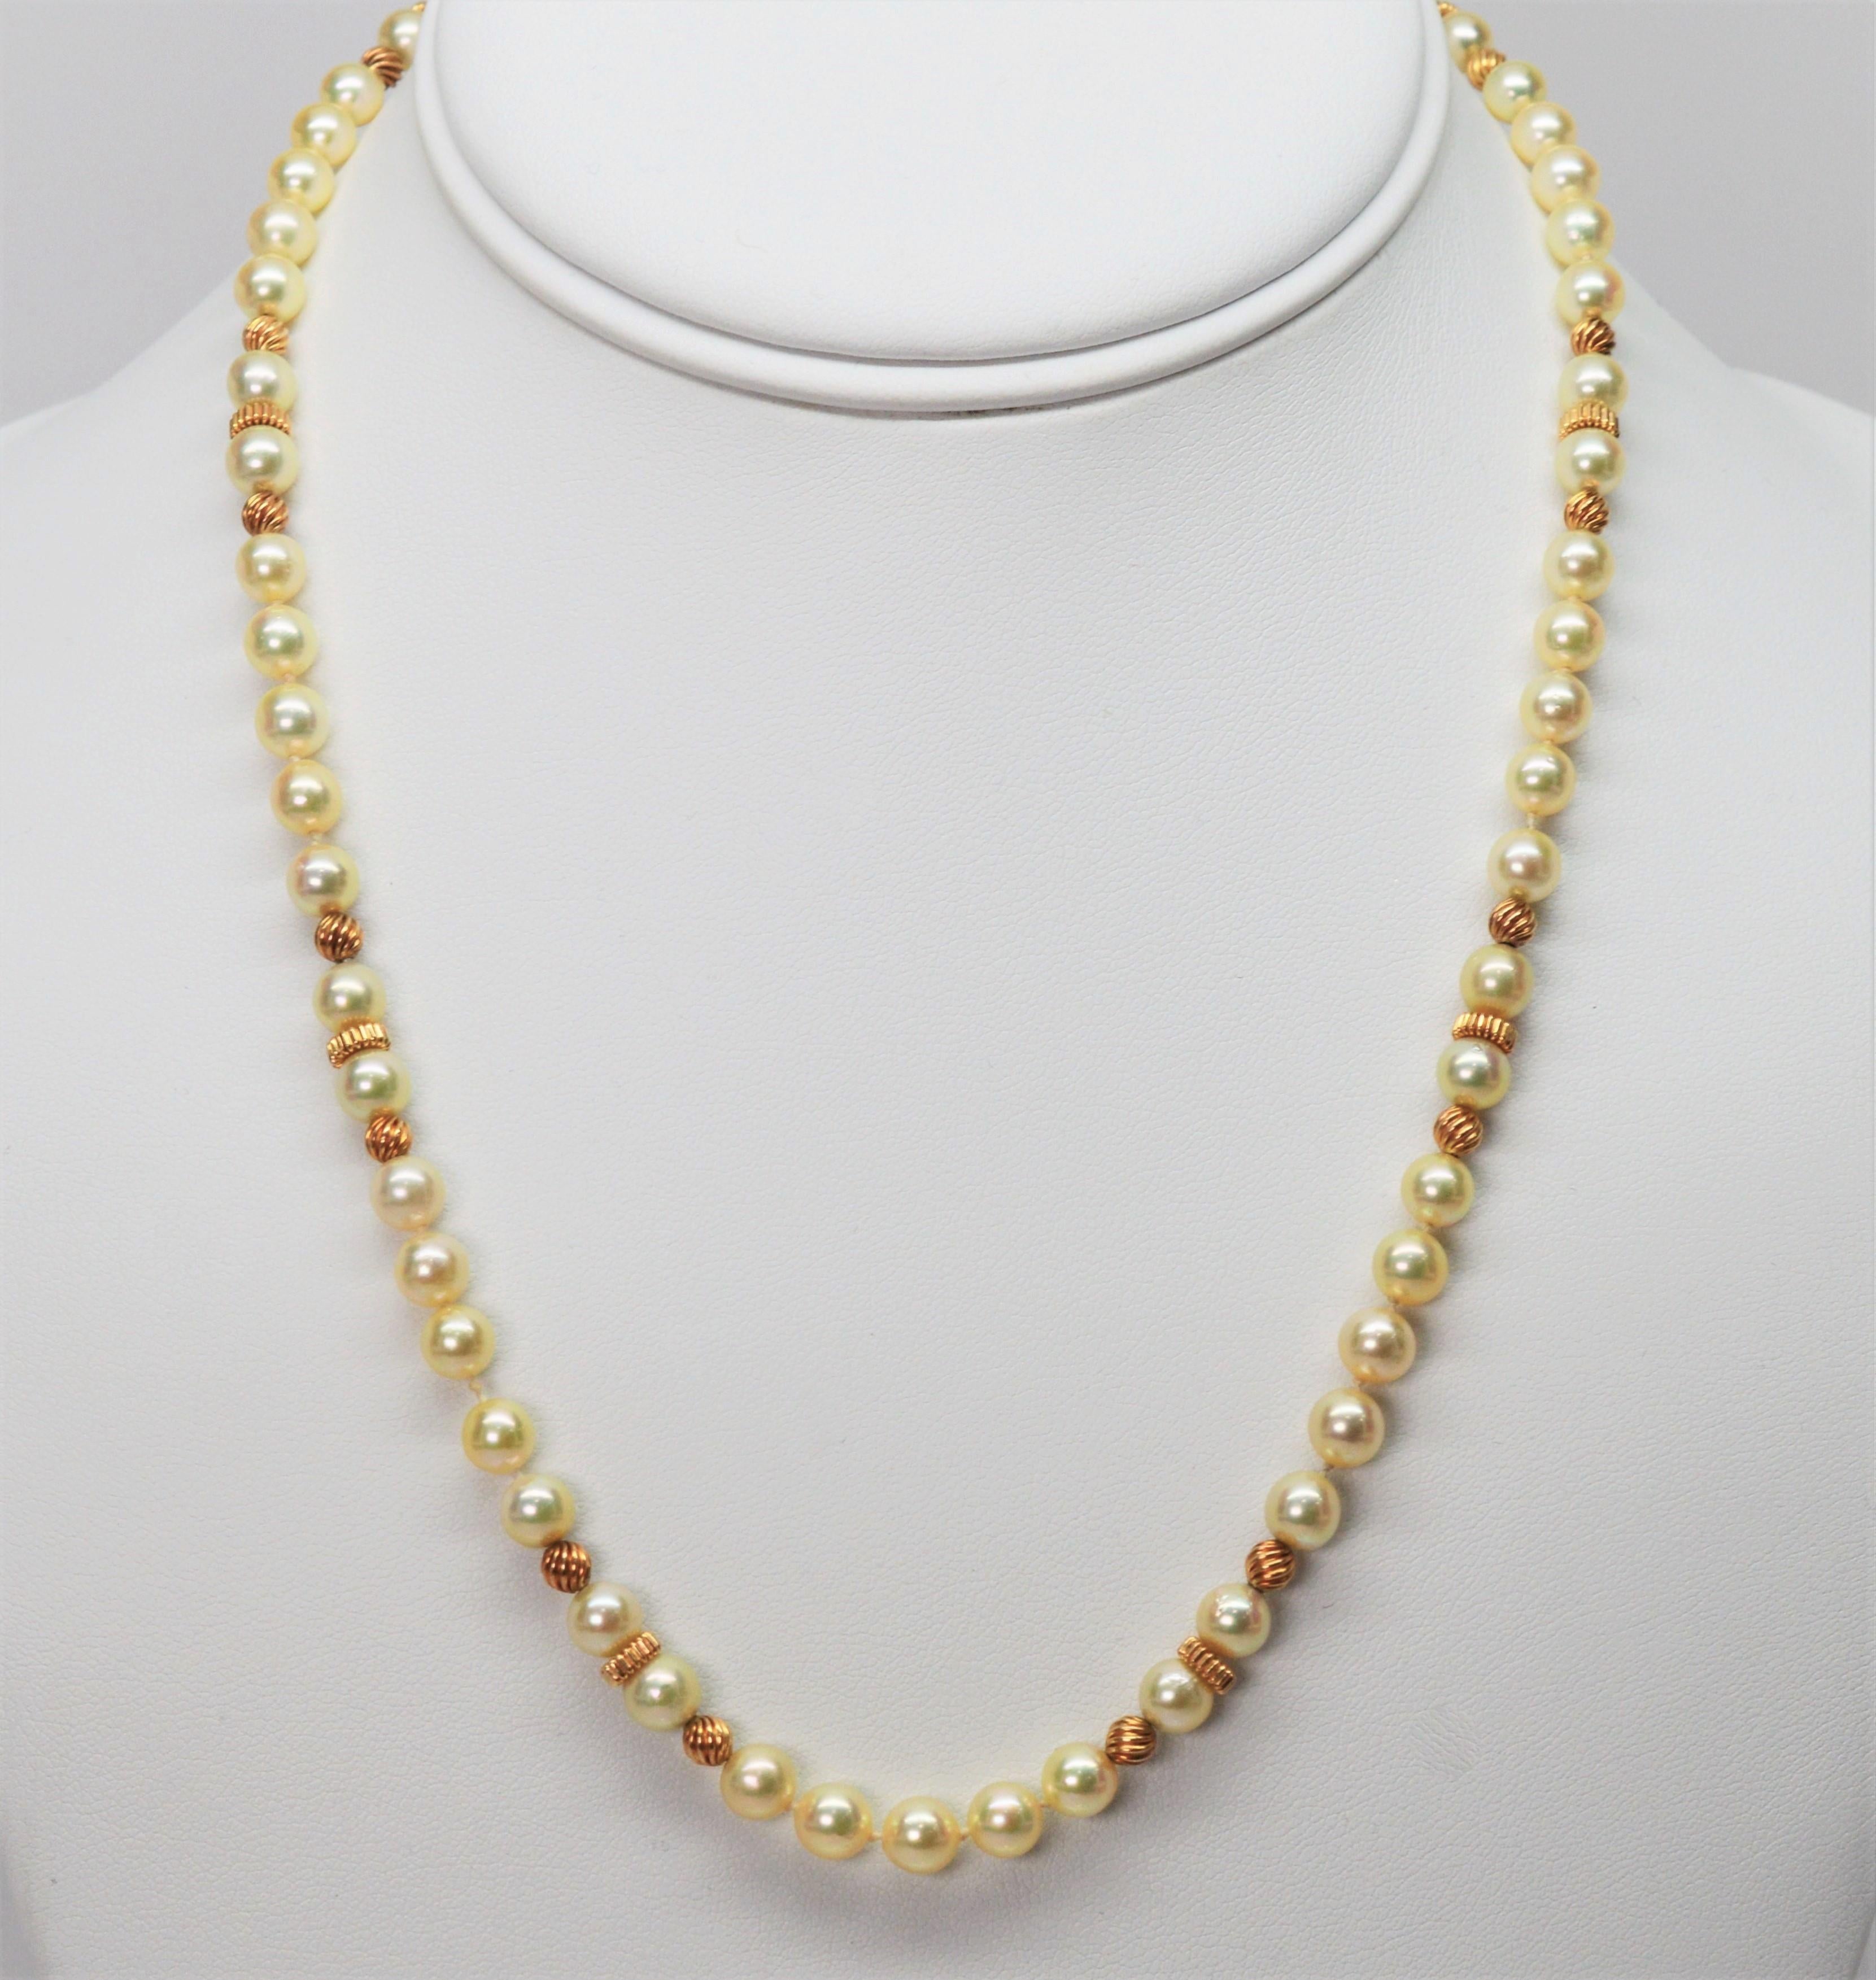 A lovely pairing of pearls and gold create matching strands for a beautiful duo. Crafted with 5.5 mm AAA round Akoya Pearls with a creamy golden hue and swirled fourteen karat 14K yellow gold rondelles. The necklace measures eighteen inches in